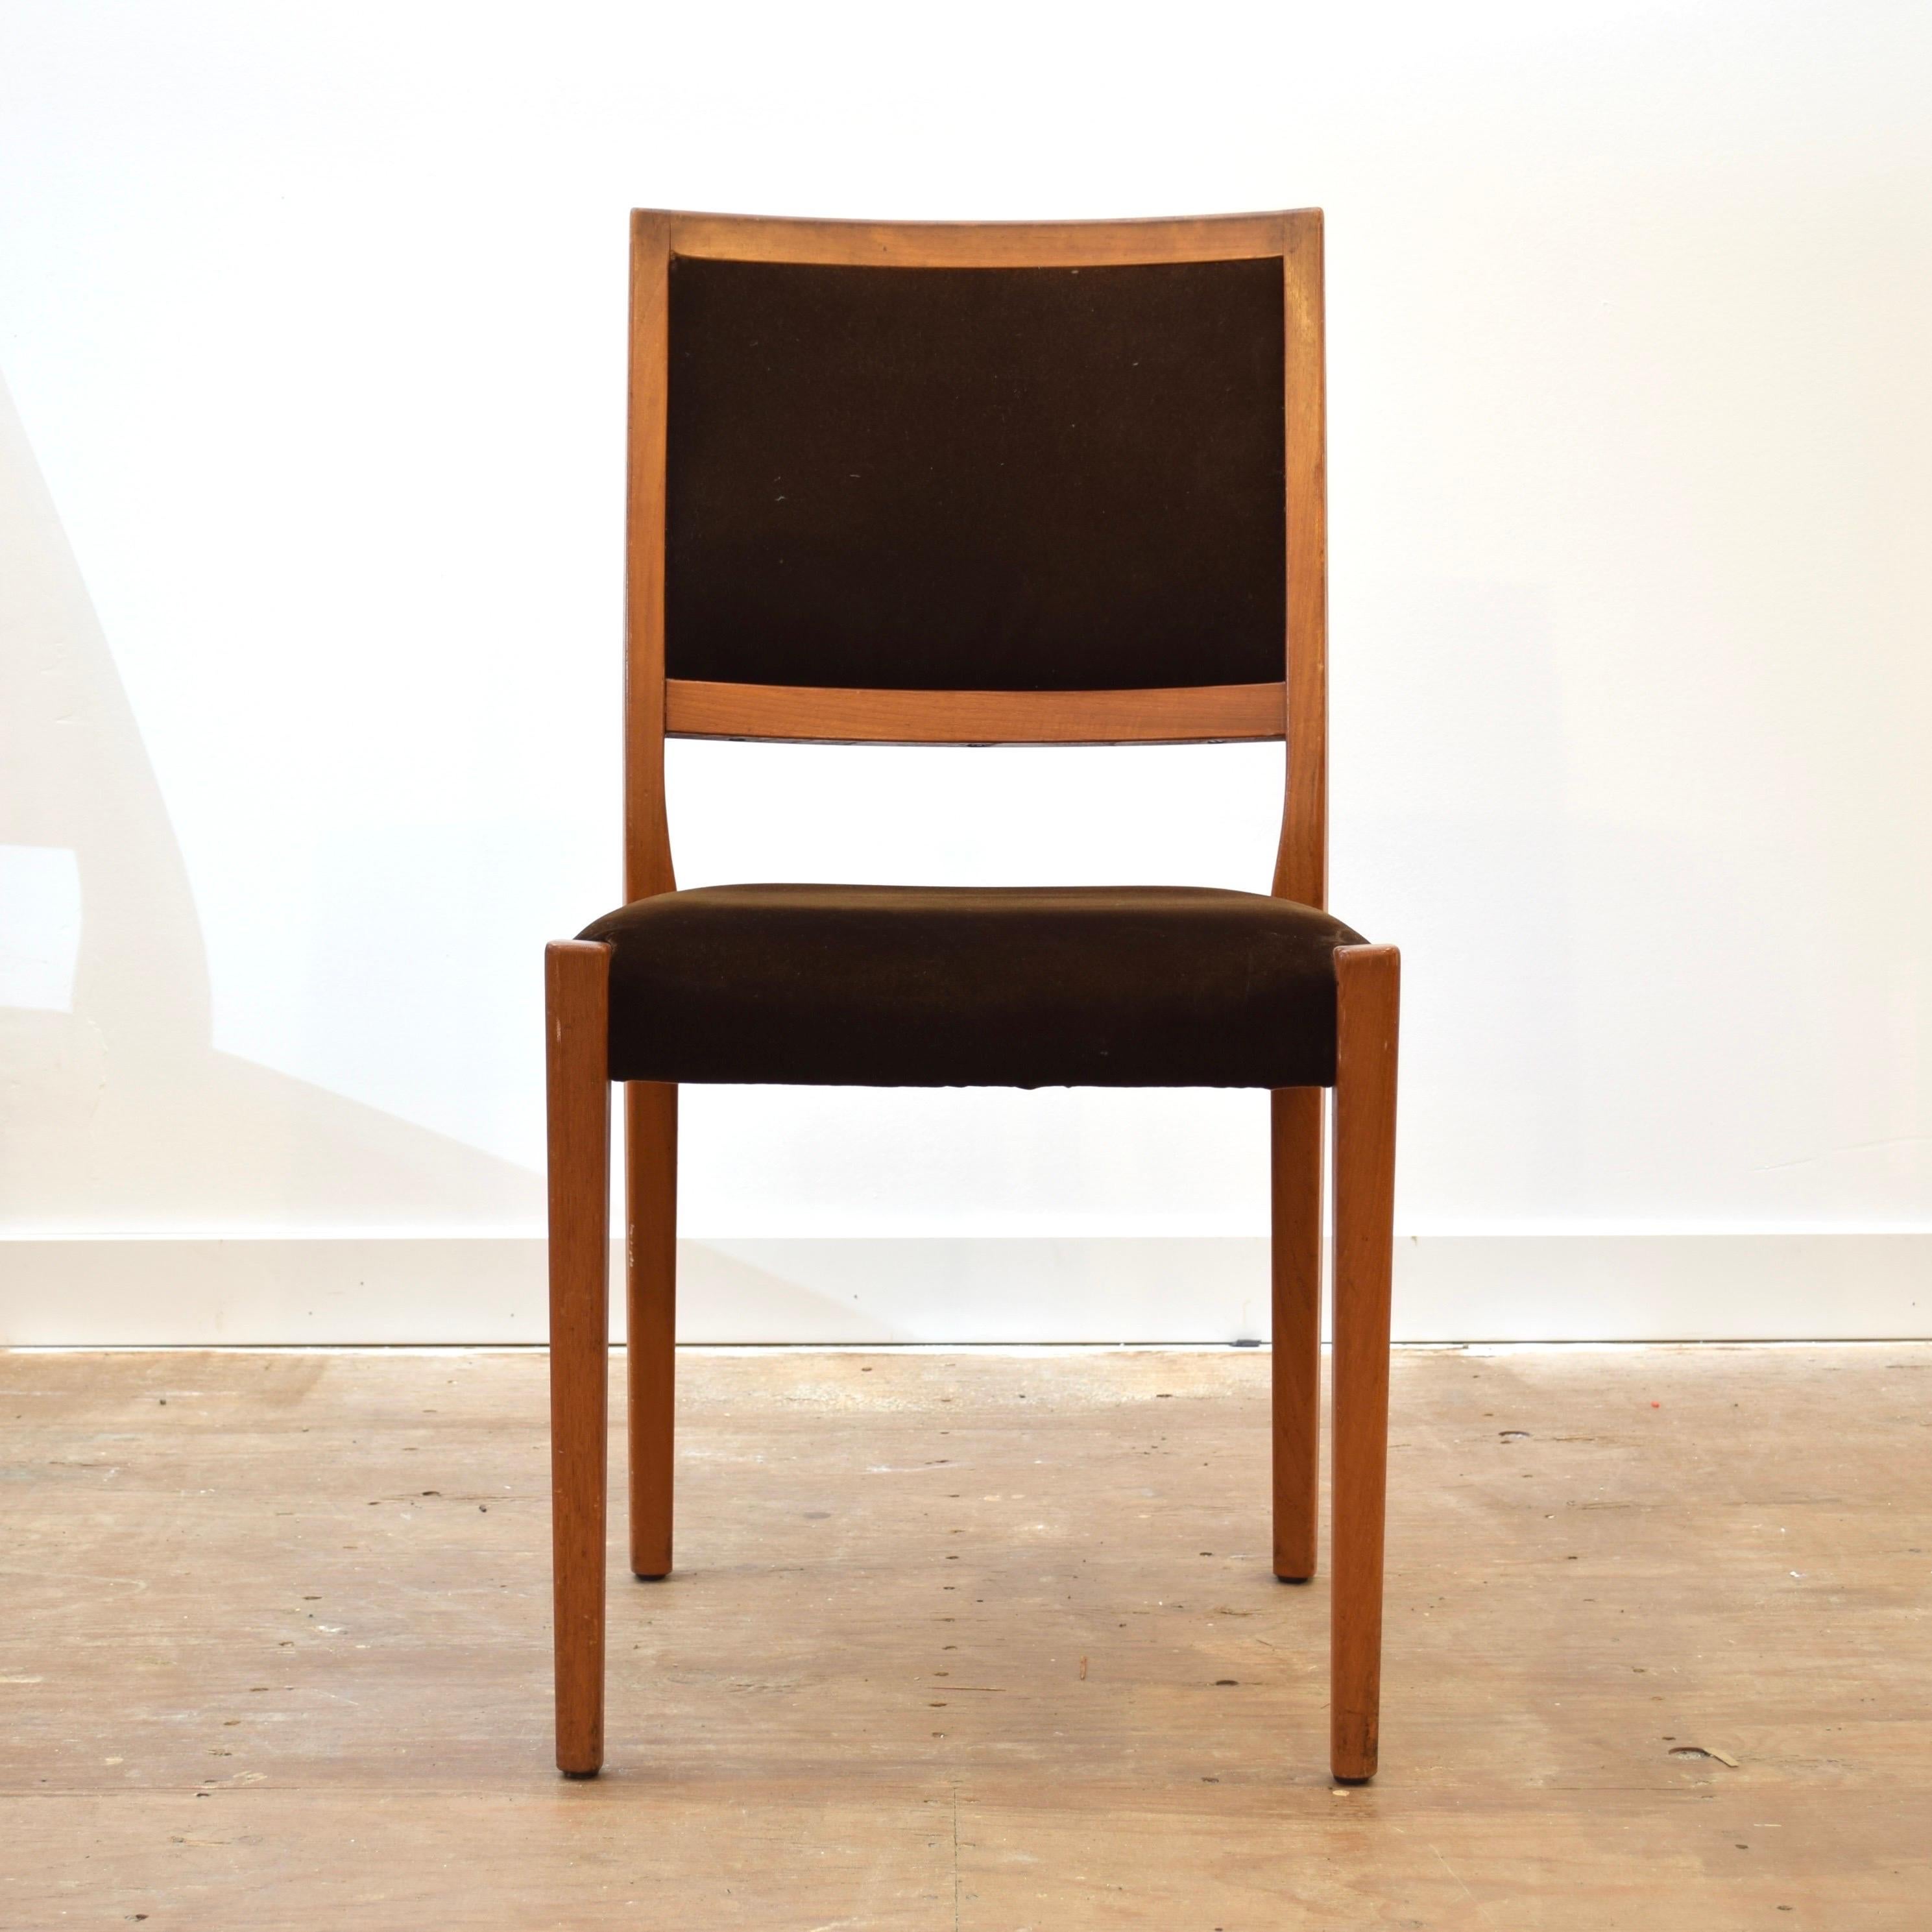 Vintage Teak Dining Chair Set by Svegard Markaryd In Good Condition For Sale In Puslinch, ON